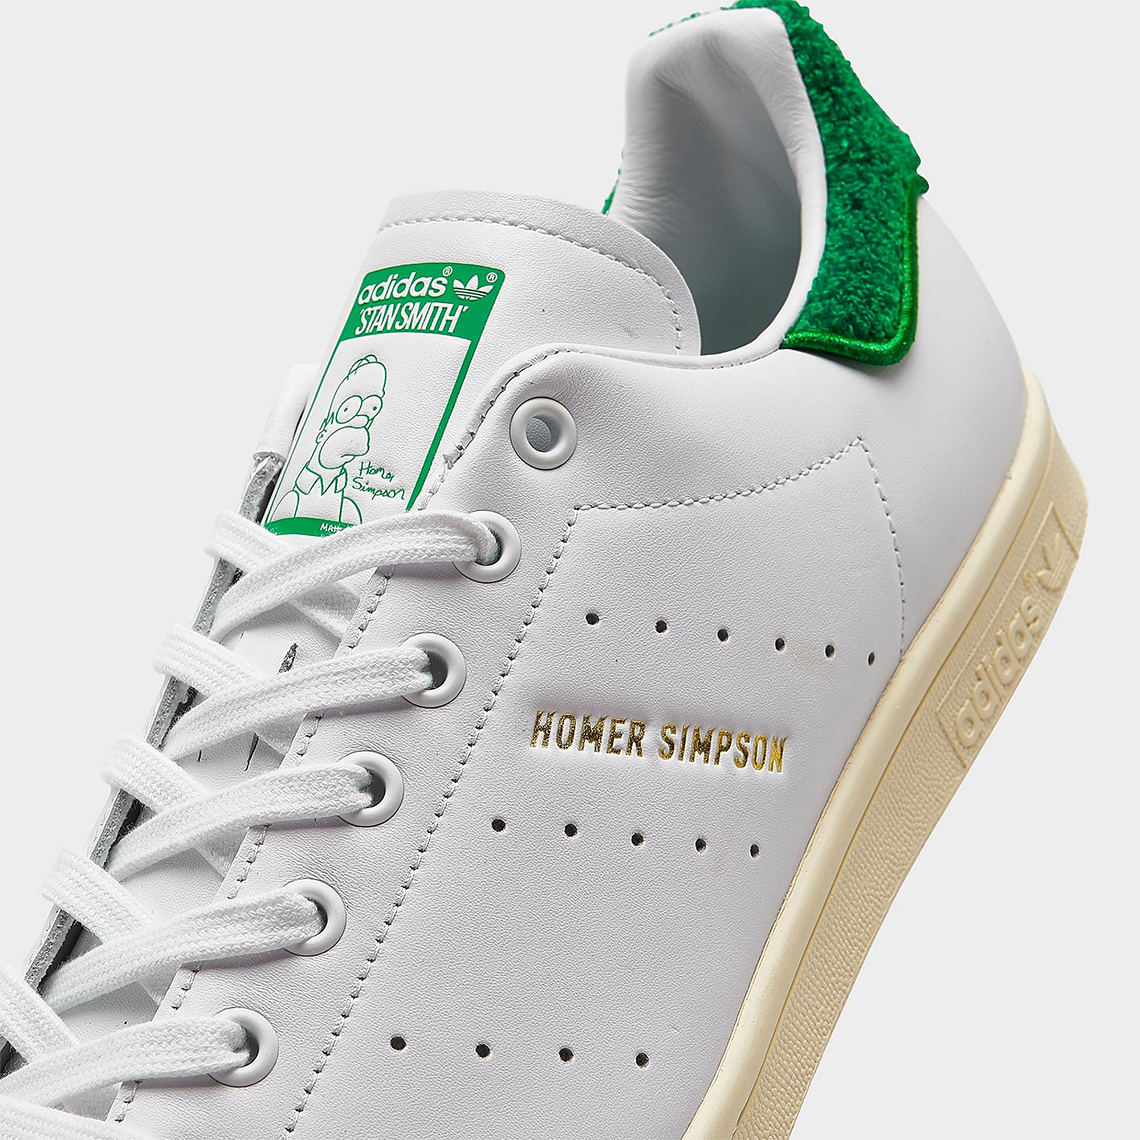 homer simpson adidas Cut stan smith ie7564 release date 5